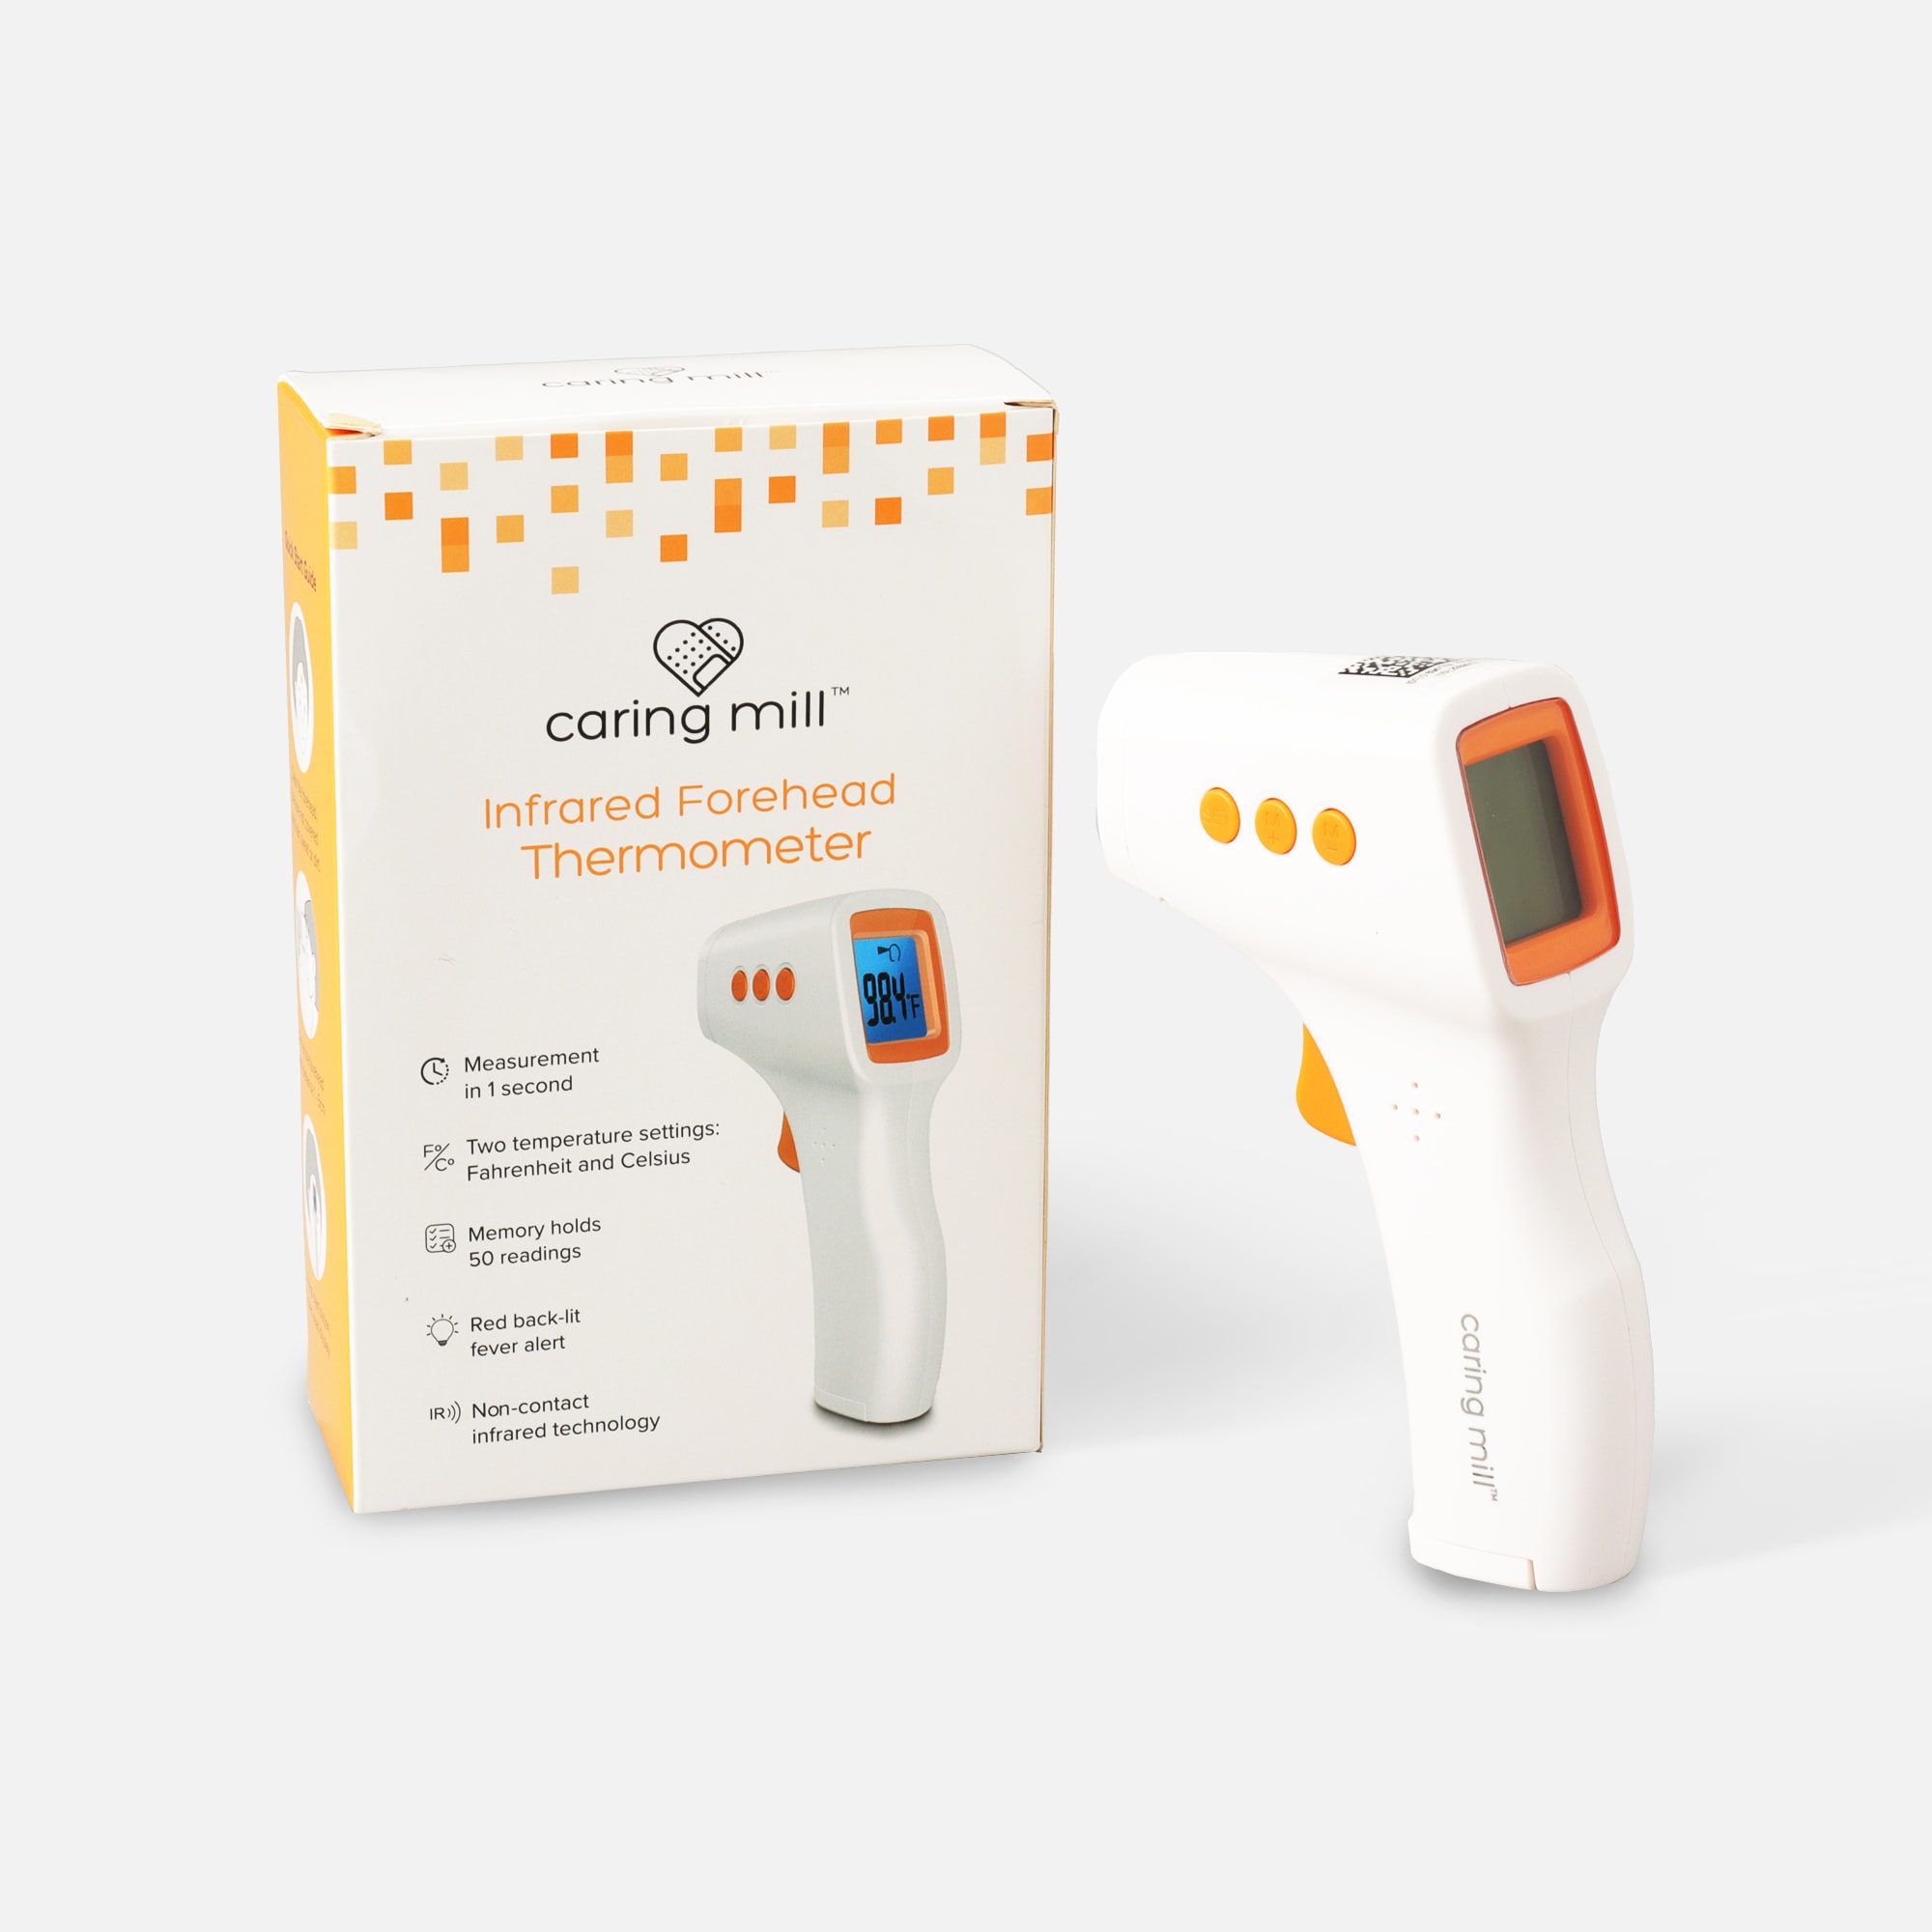 https://hsastore.com/on/demandware.static/-/Sites-hec-master/default/dw3394f0d1/images/large/caring-mill-handheld-infrared-thermometer-28704-62.jpg